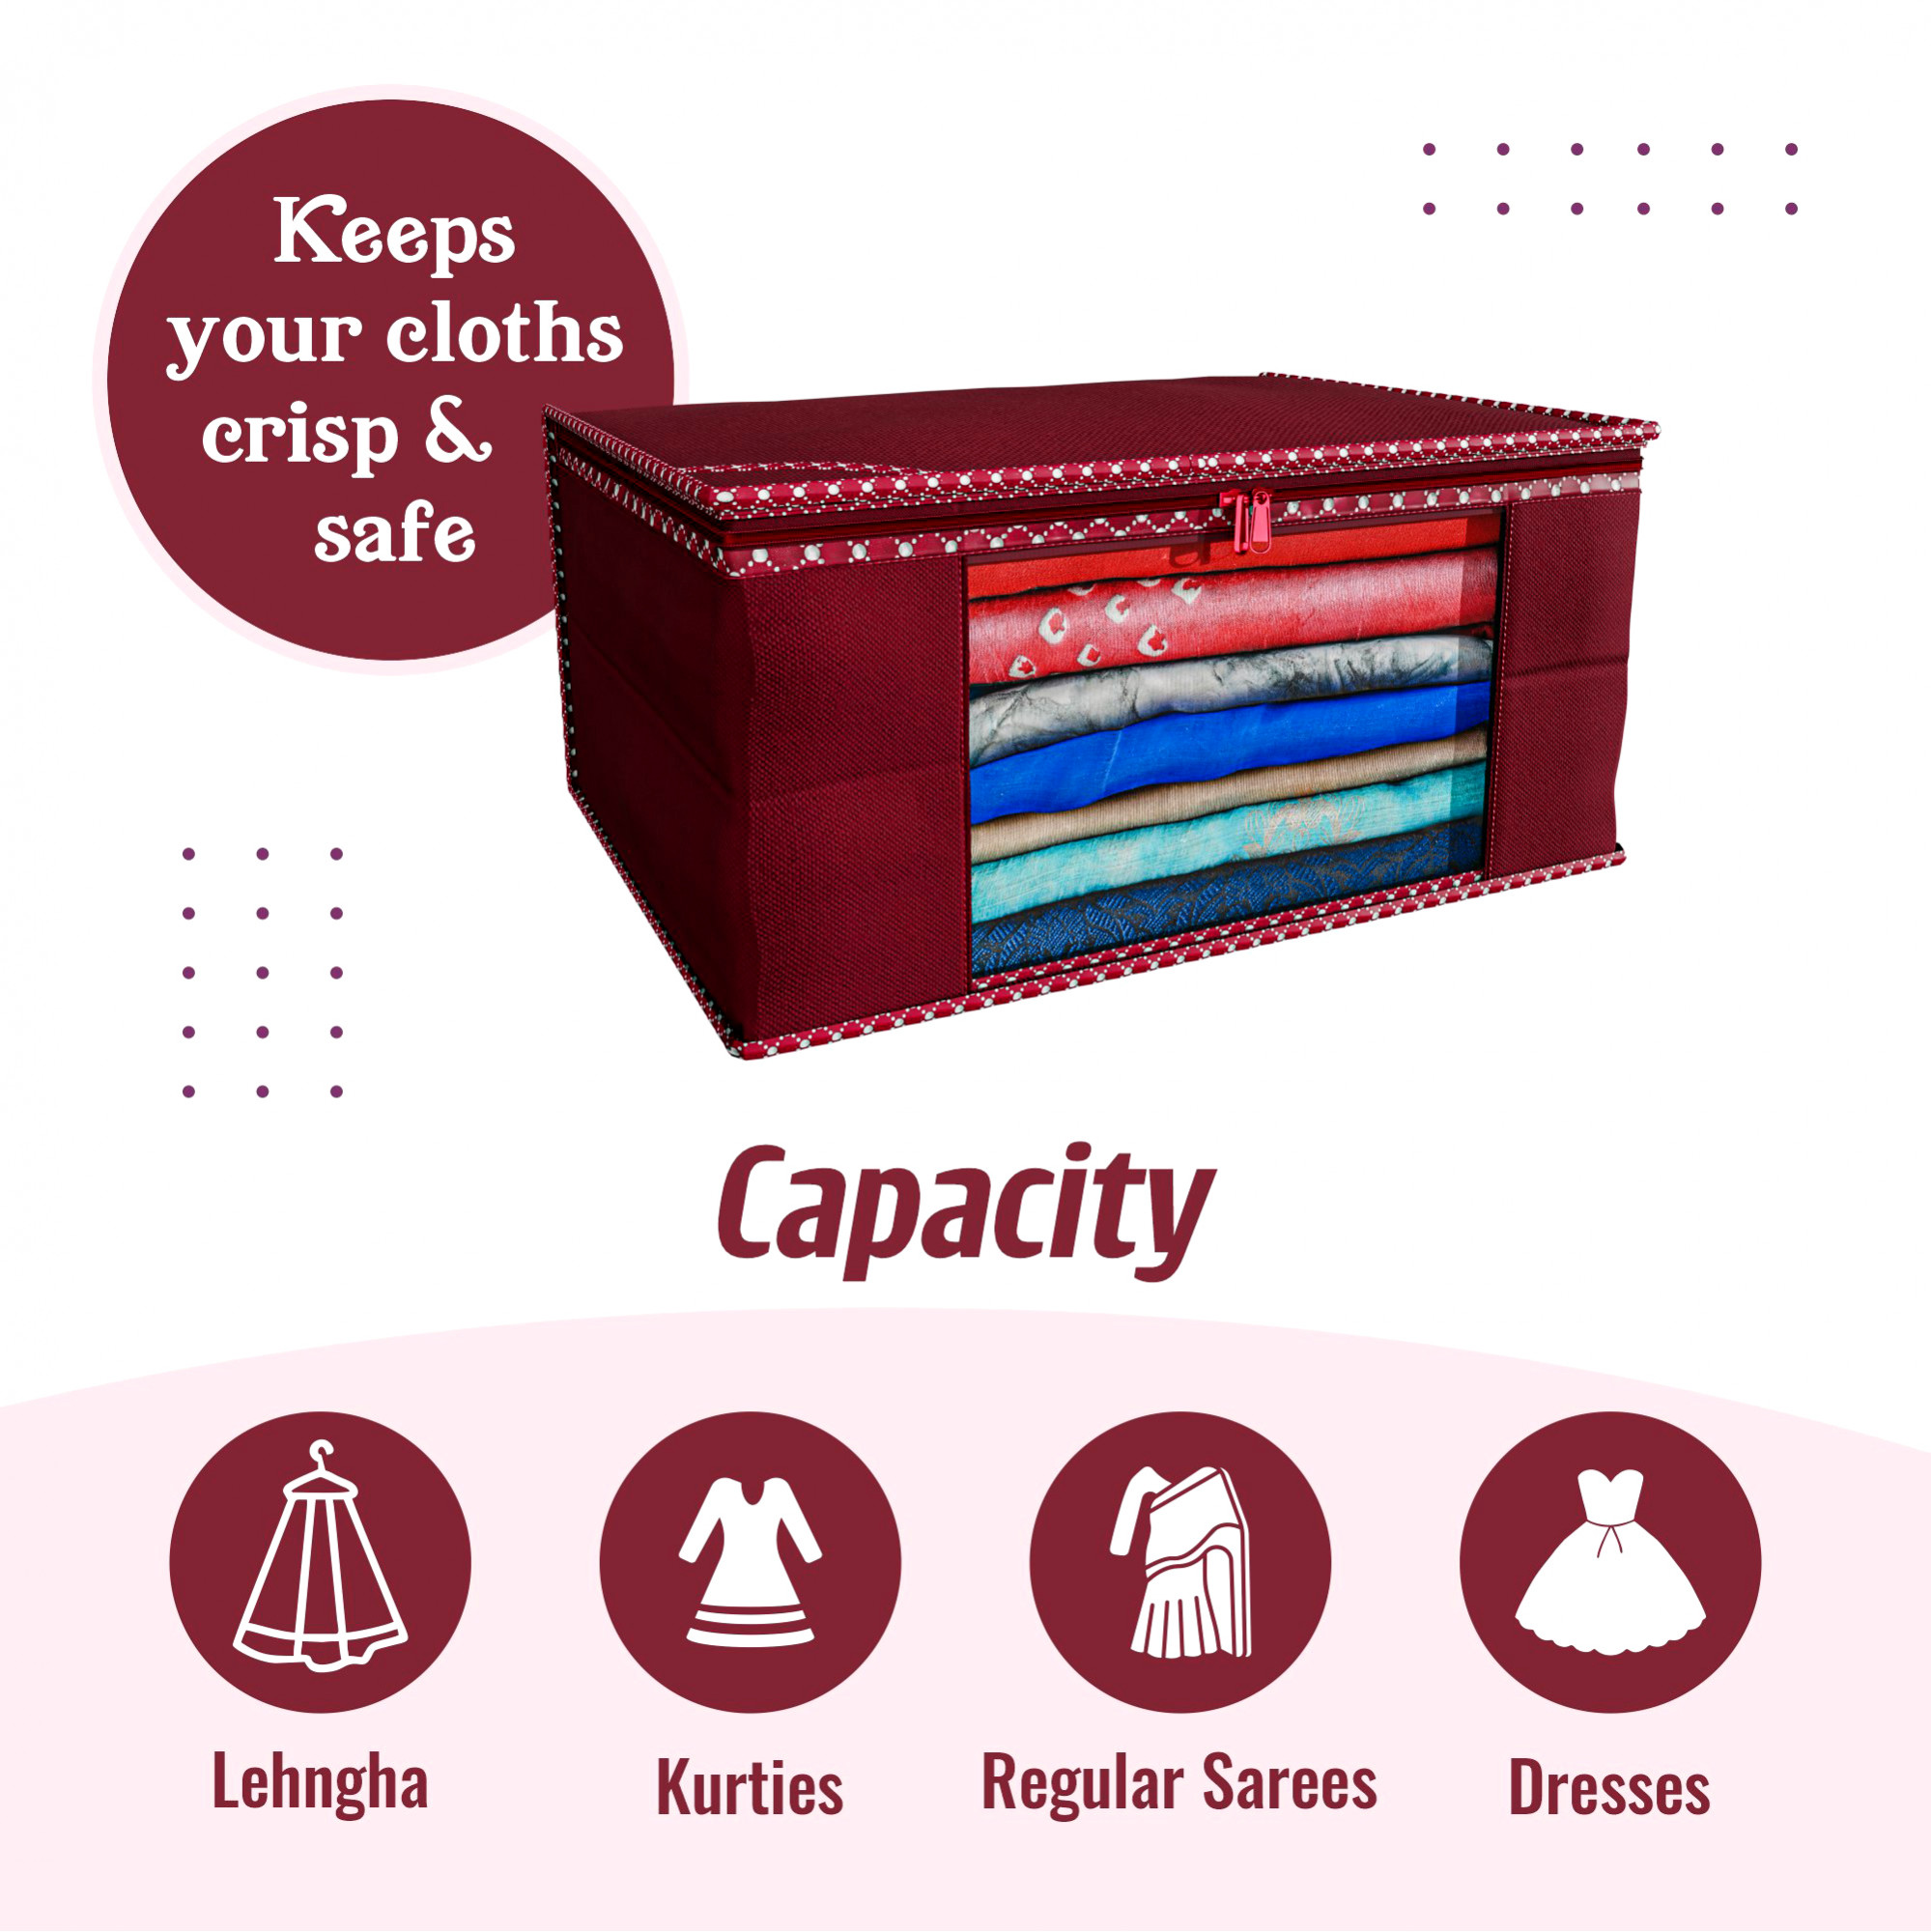 Kuber Industries Non Woven Fabric Saree Cover/Clothes Organizer|Solid Color & Transparent Window|Zipper Closure With Foldable Material|Size 43 x 35 x 22, Pack of 6 (Maroon)